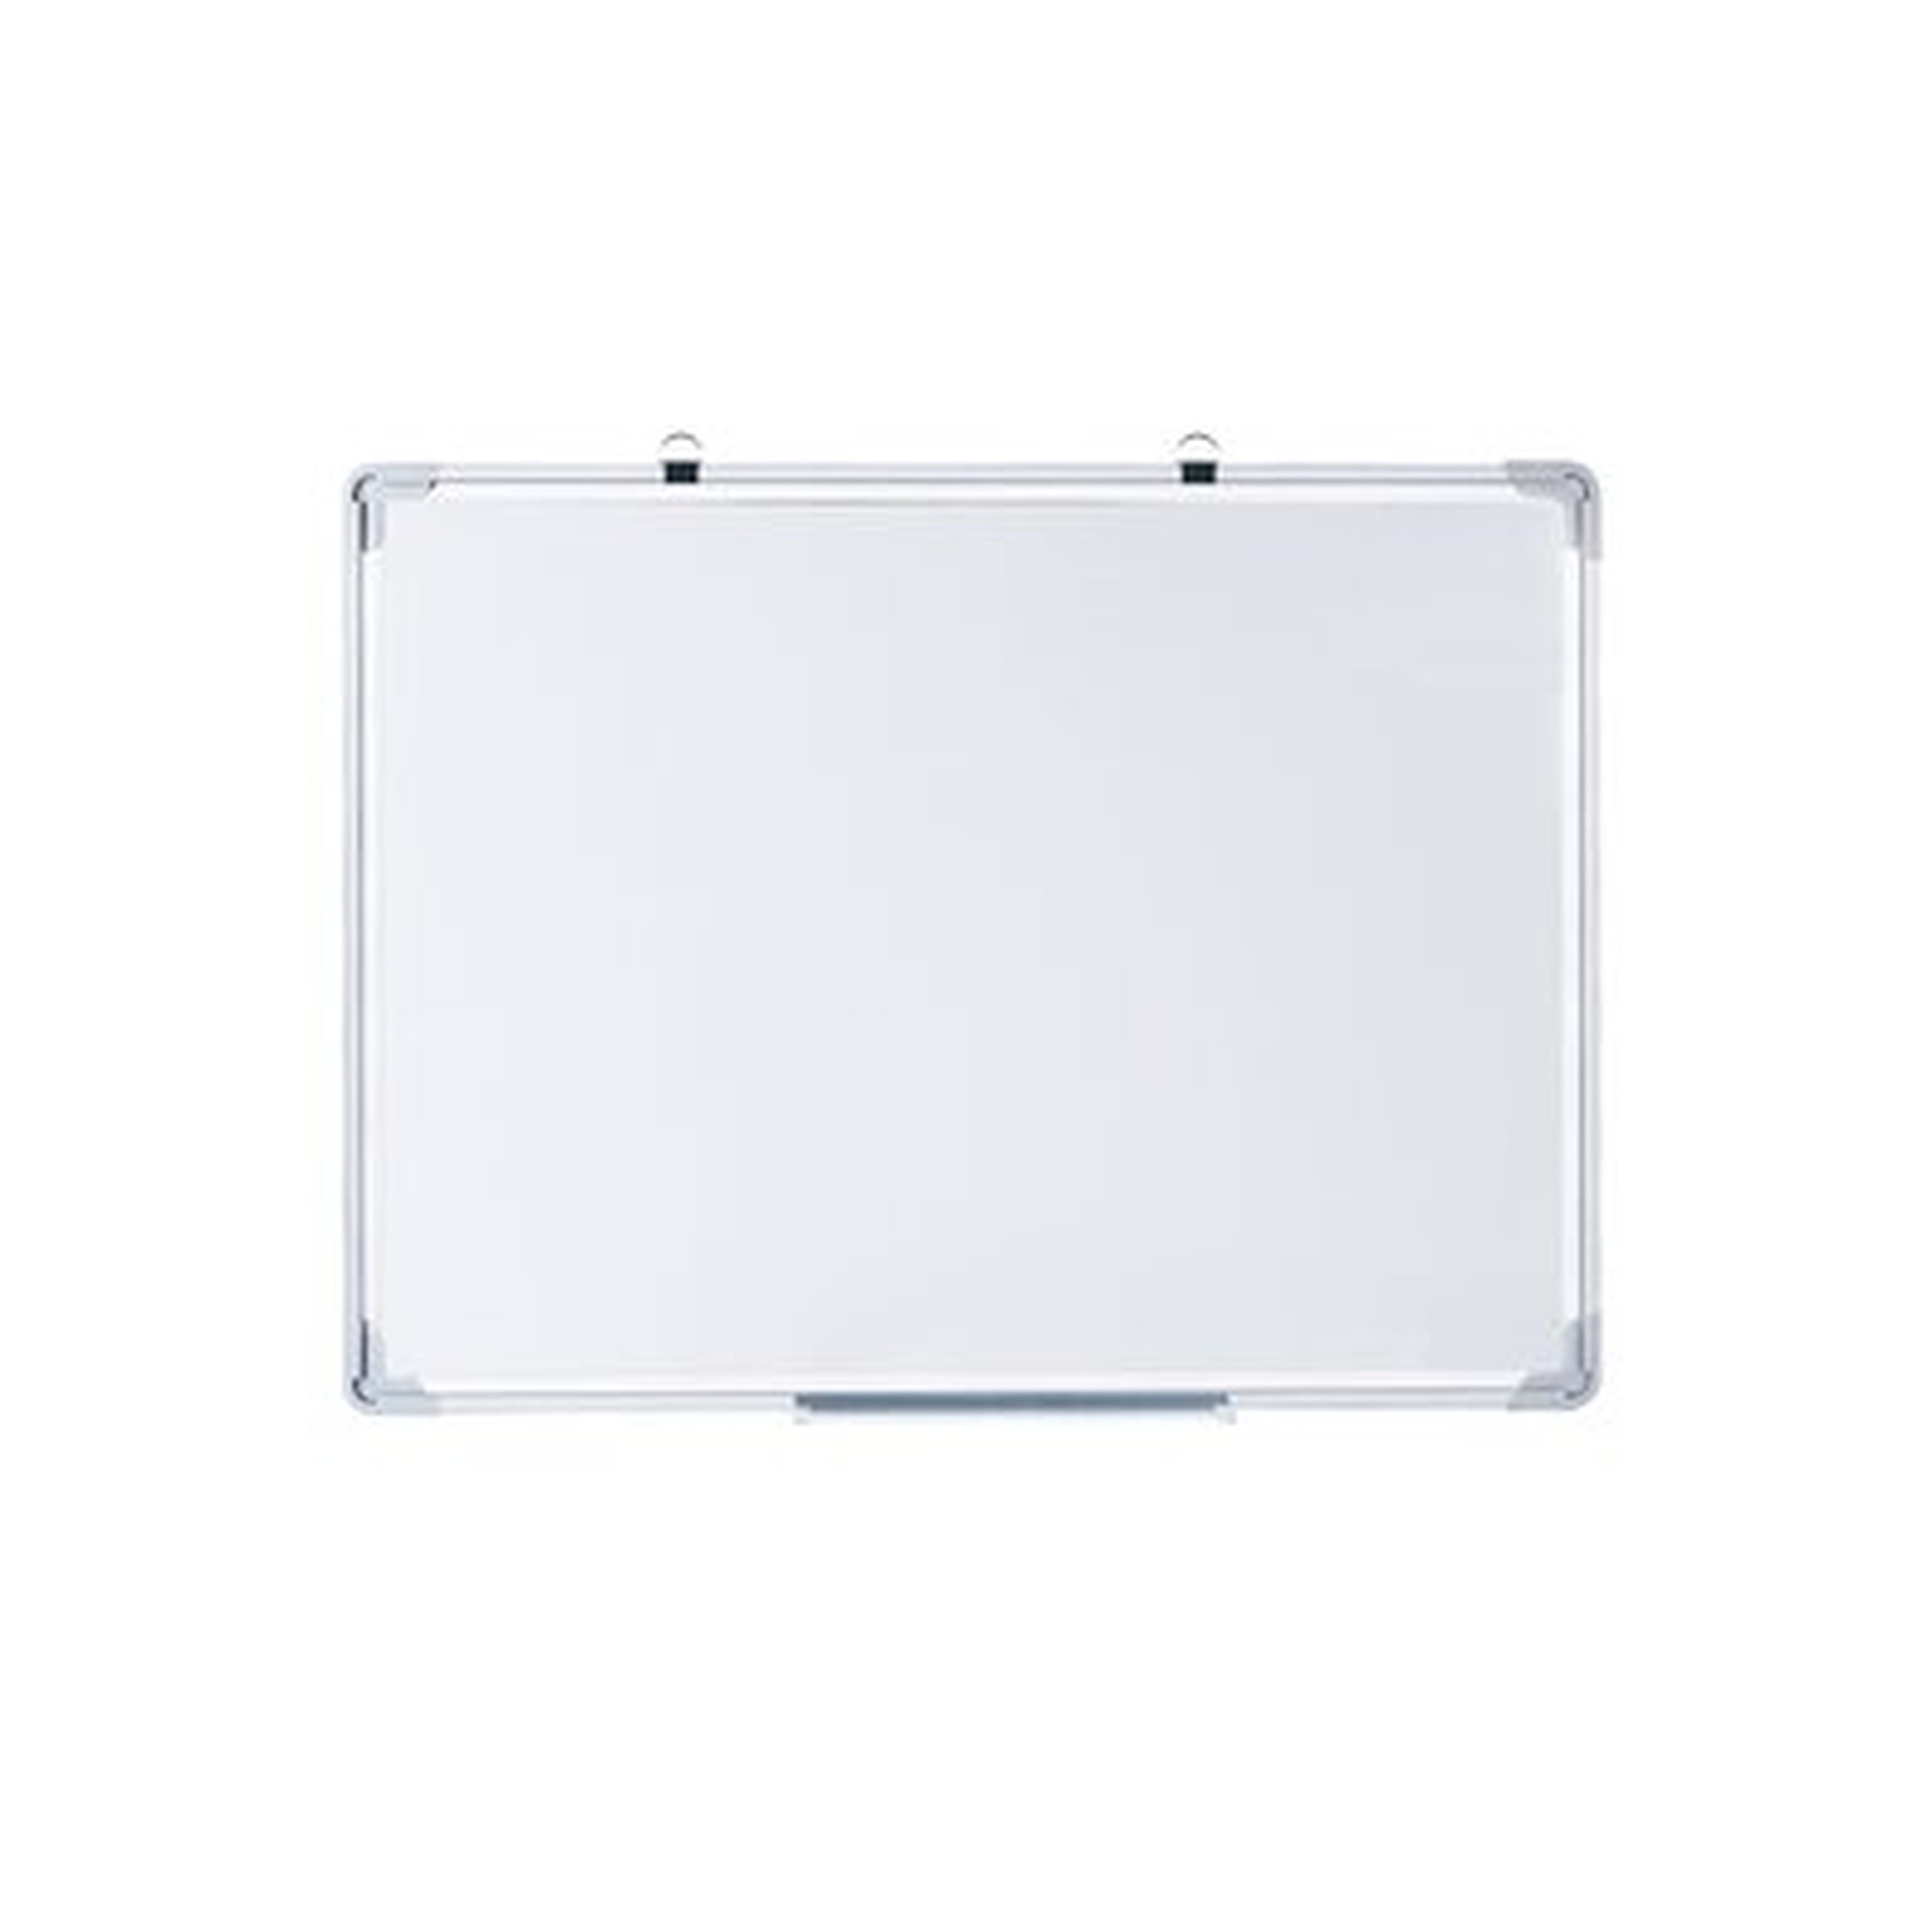 24"X16" Magnetic Whiteboard For Wall - Wayfair